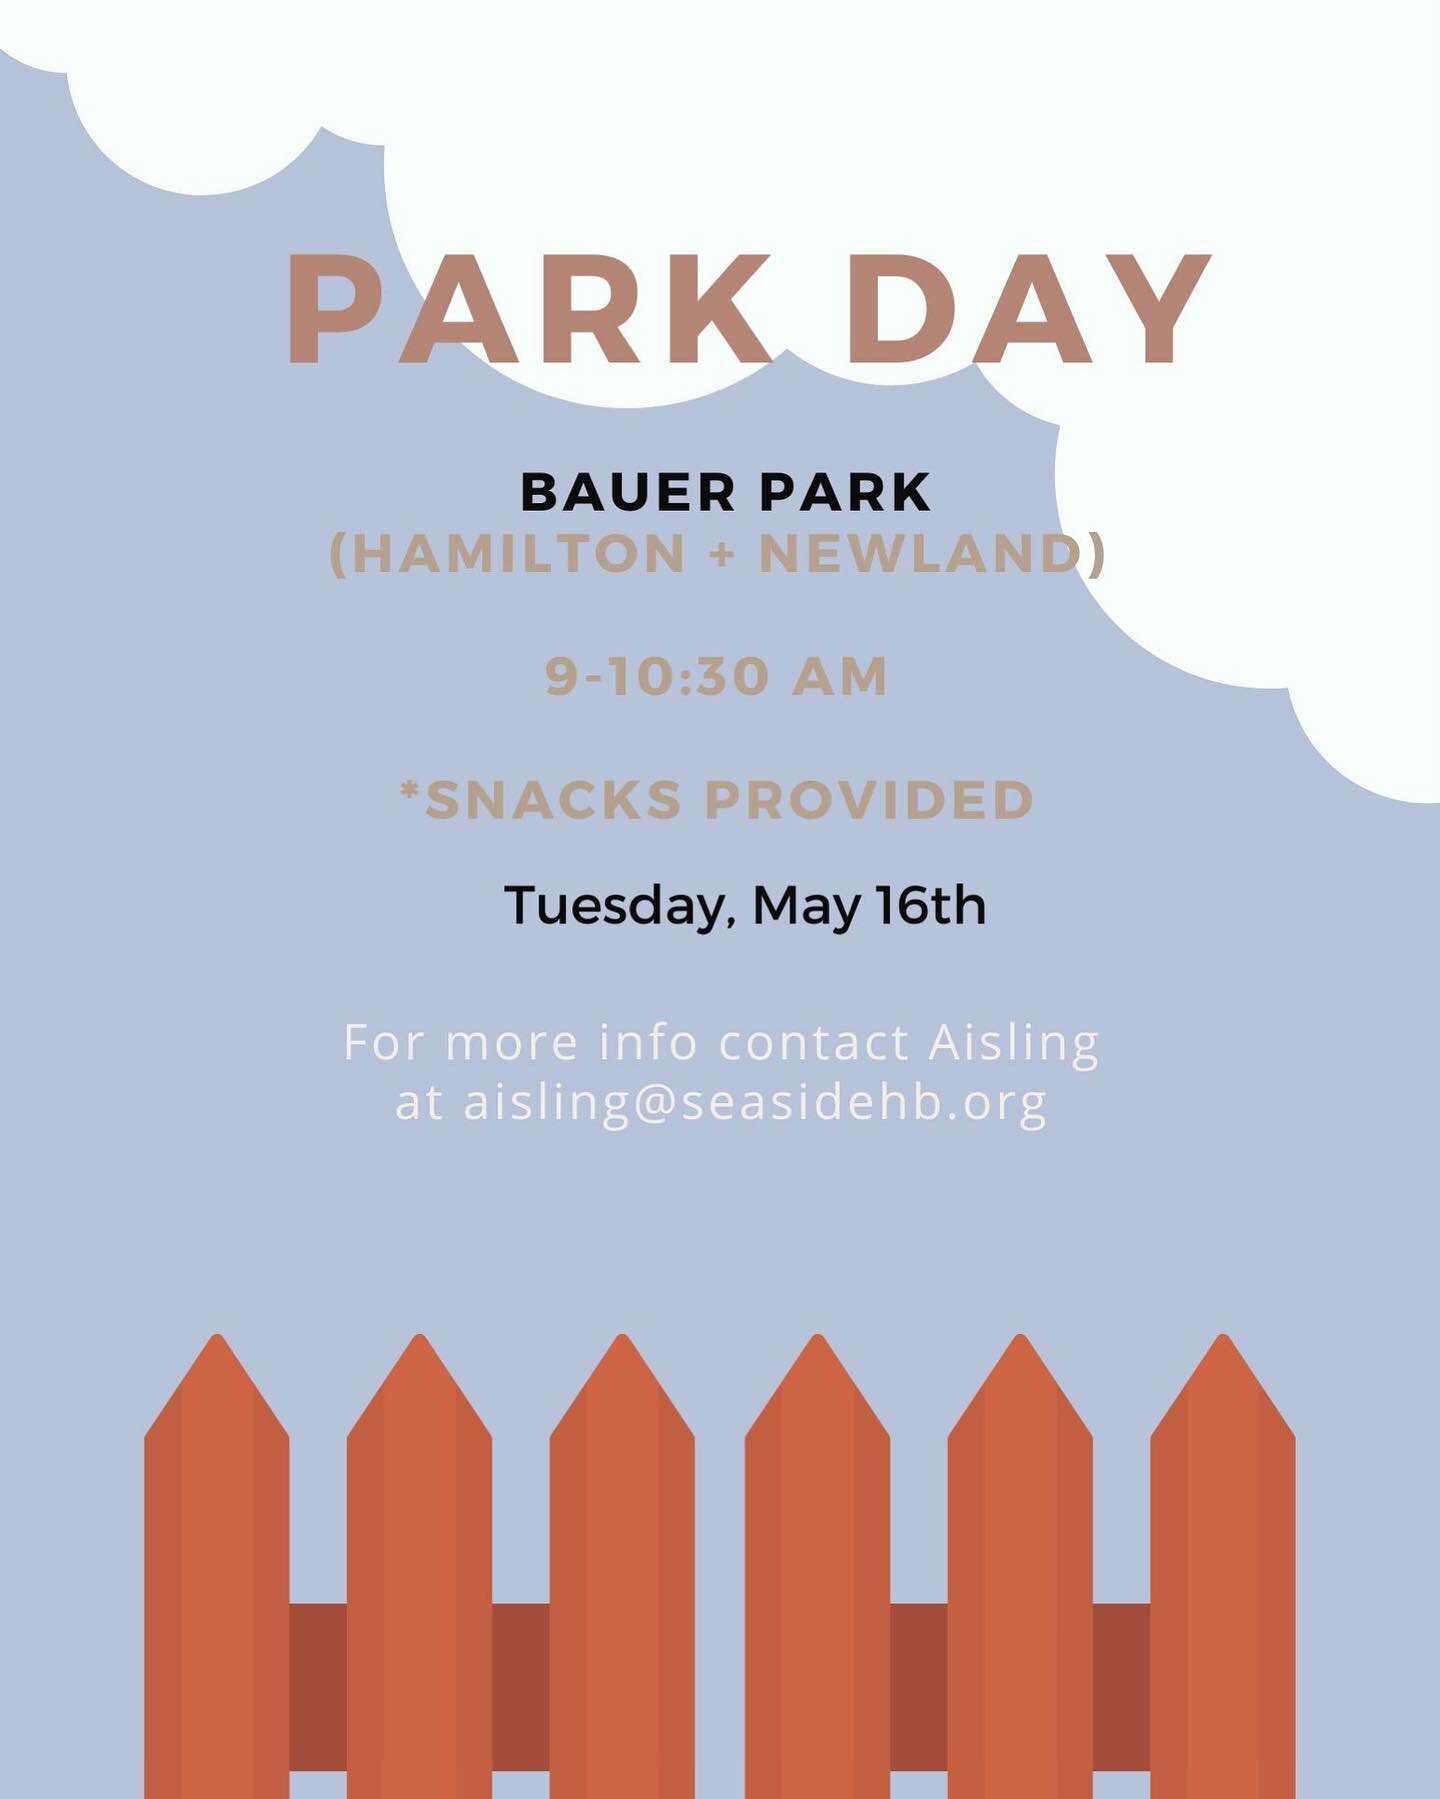 In lieu of our story time, join us at Bauer park tomorrow from 9-10:30!